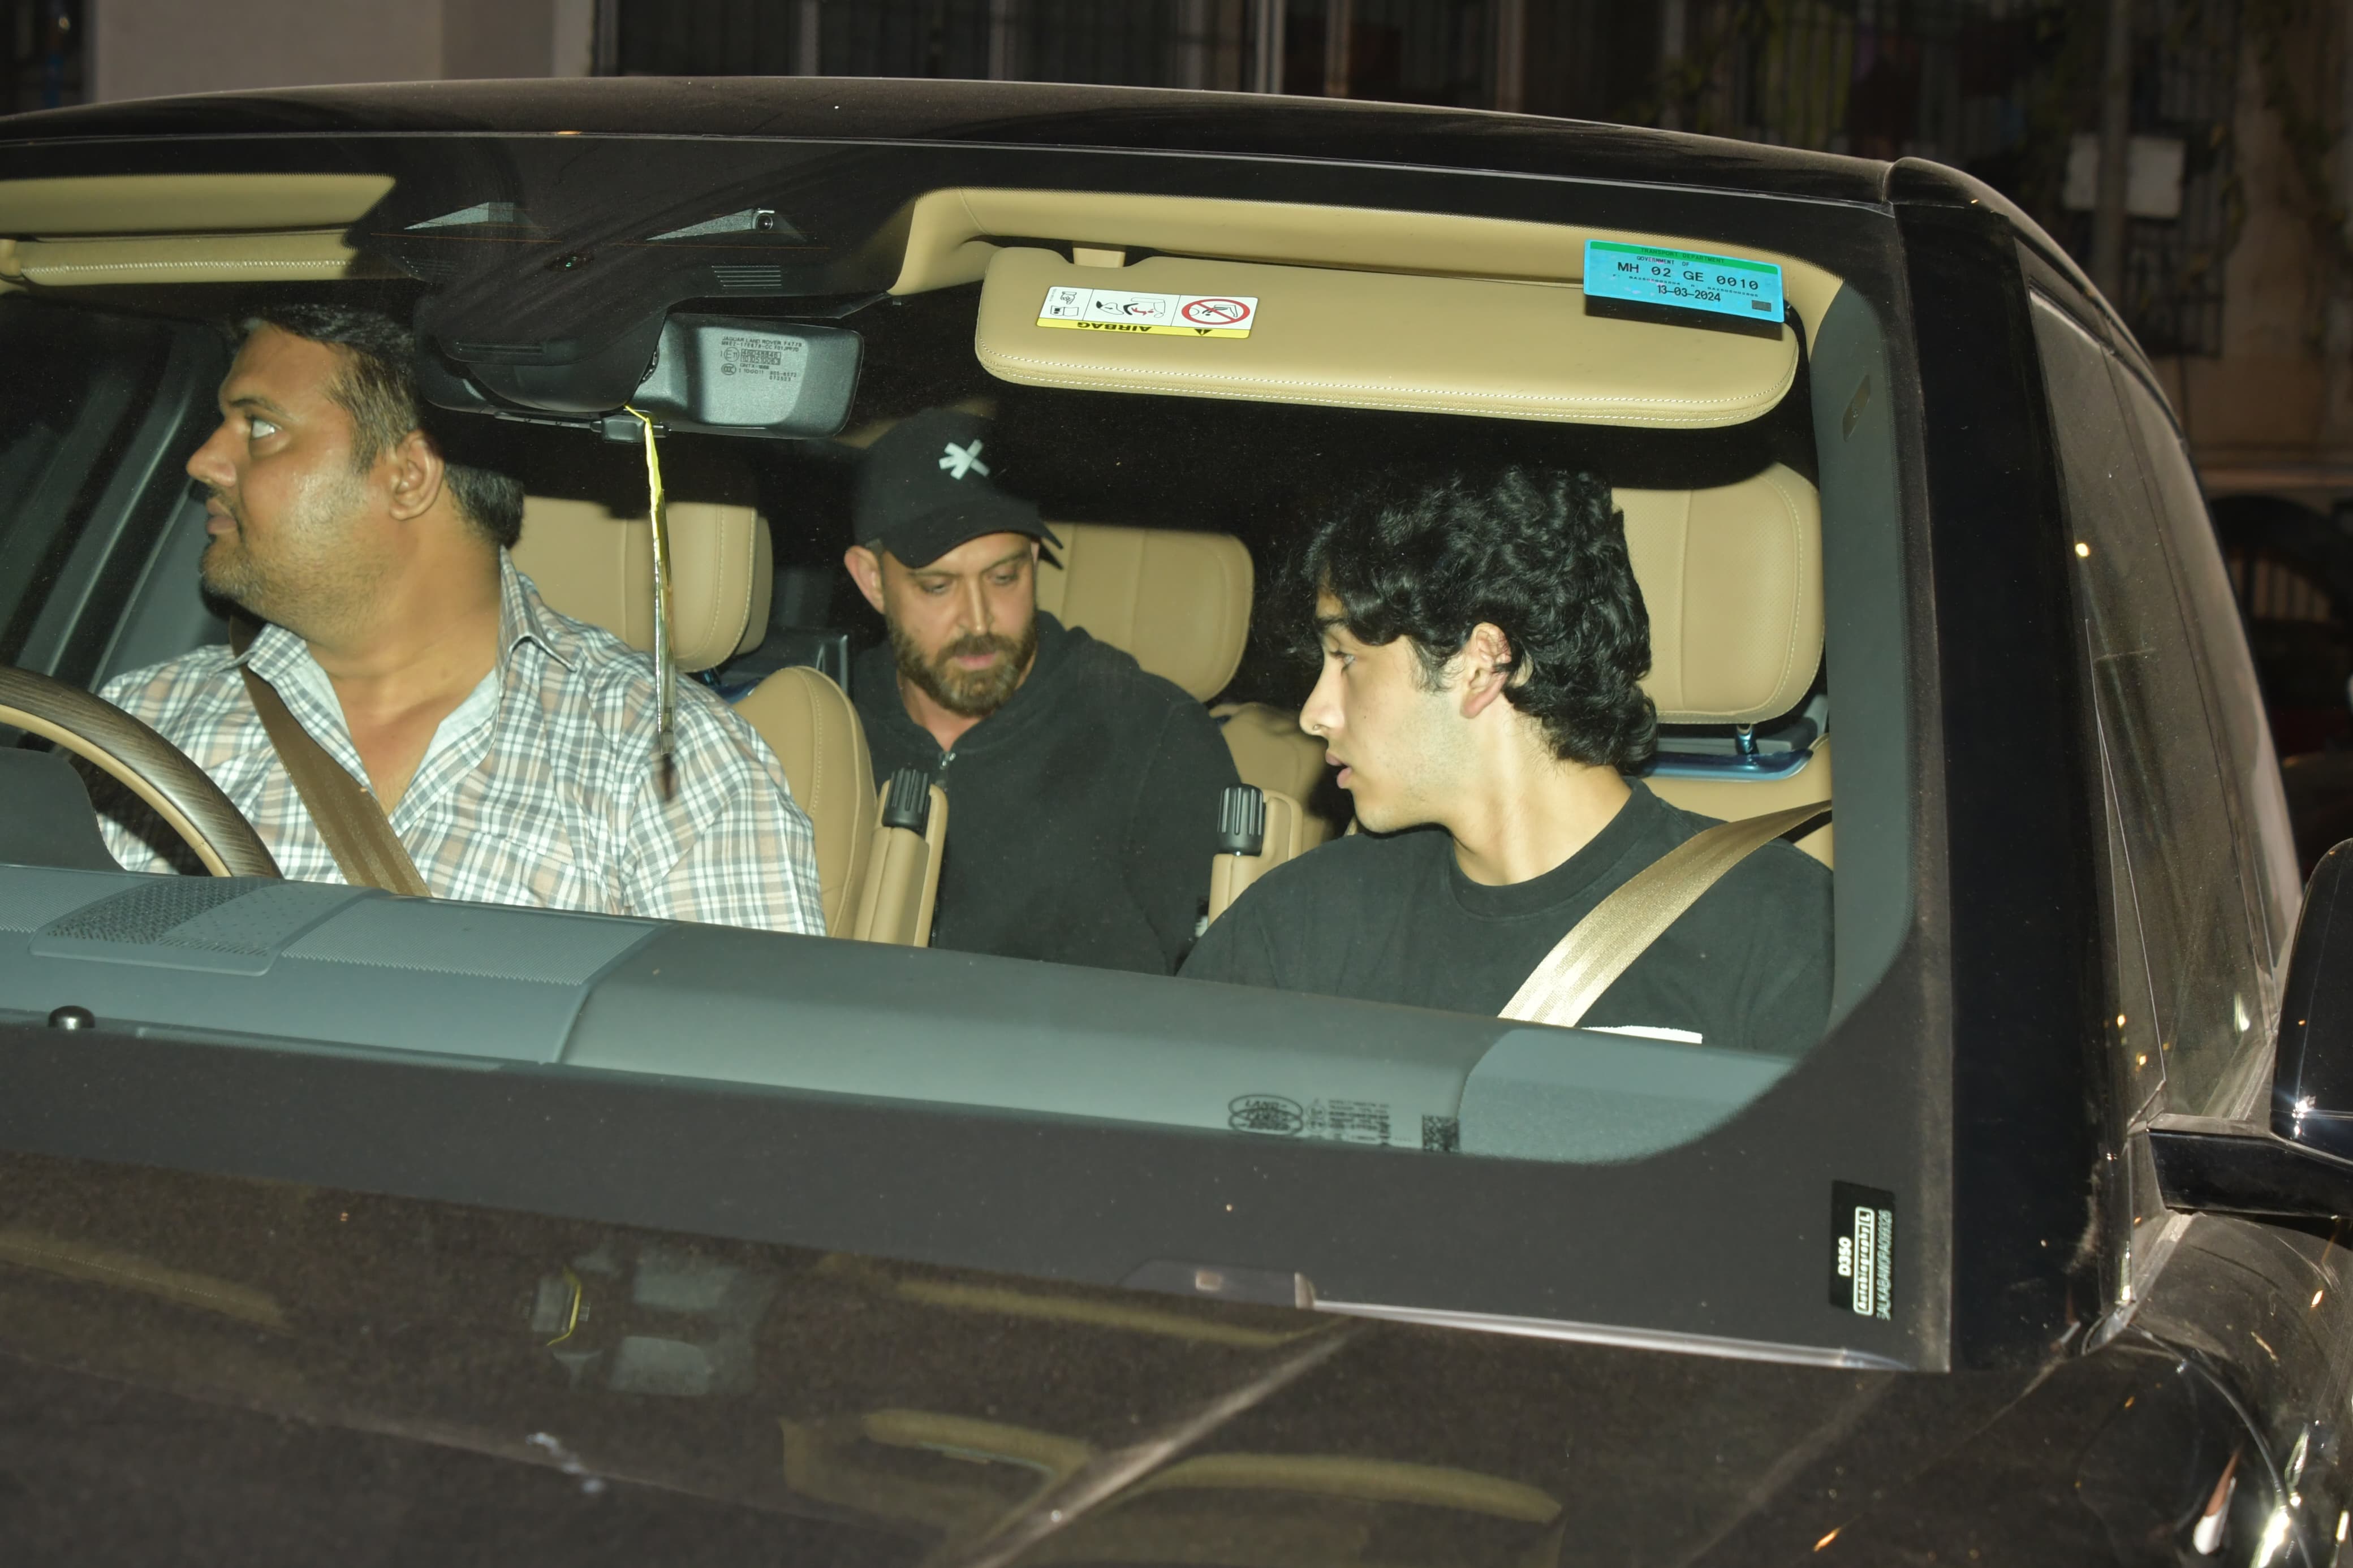 Hrithik was present in the car alongside his son. The duo seemed engaged in intense conversation as they navigated the road